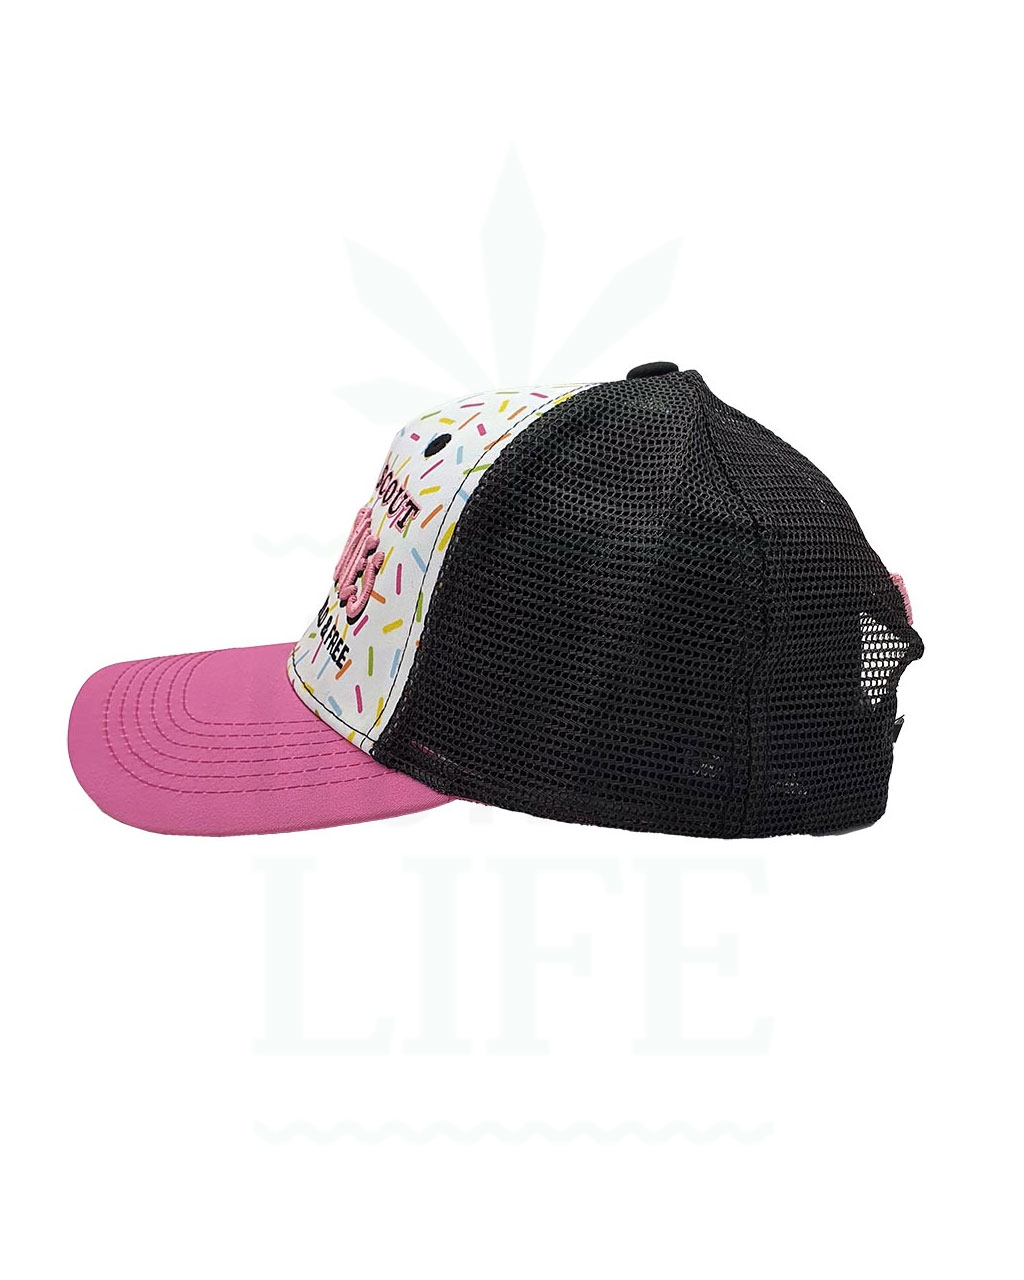 Fashion LAUREN ROSE The Collection Snapback Trucker Cap | Girl Scout Cookies